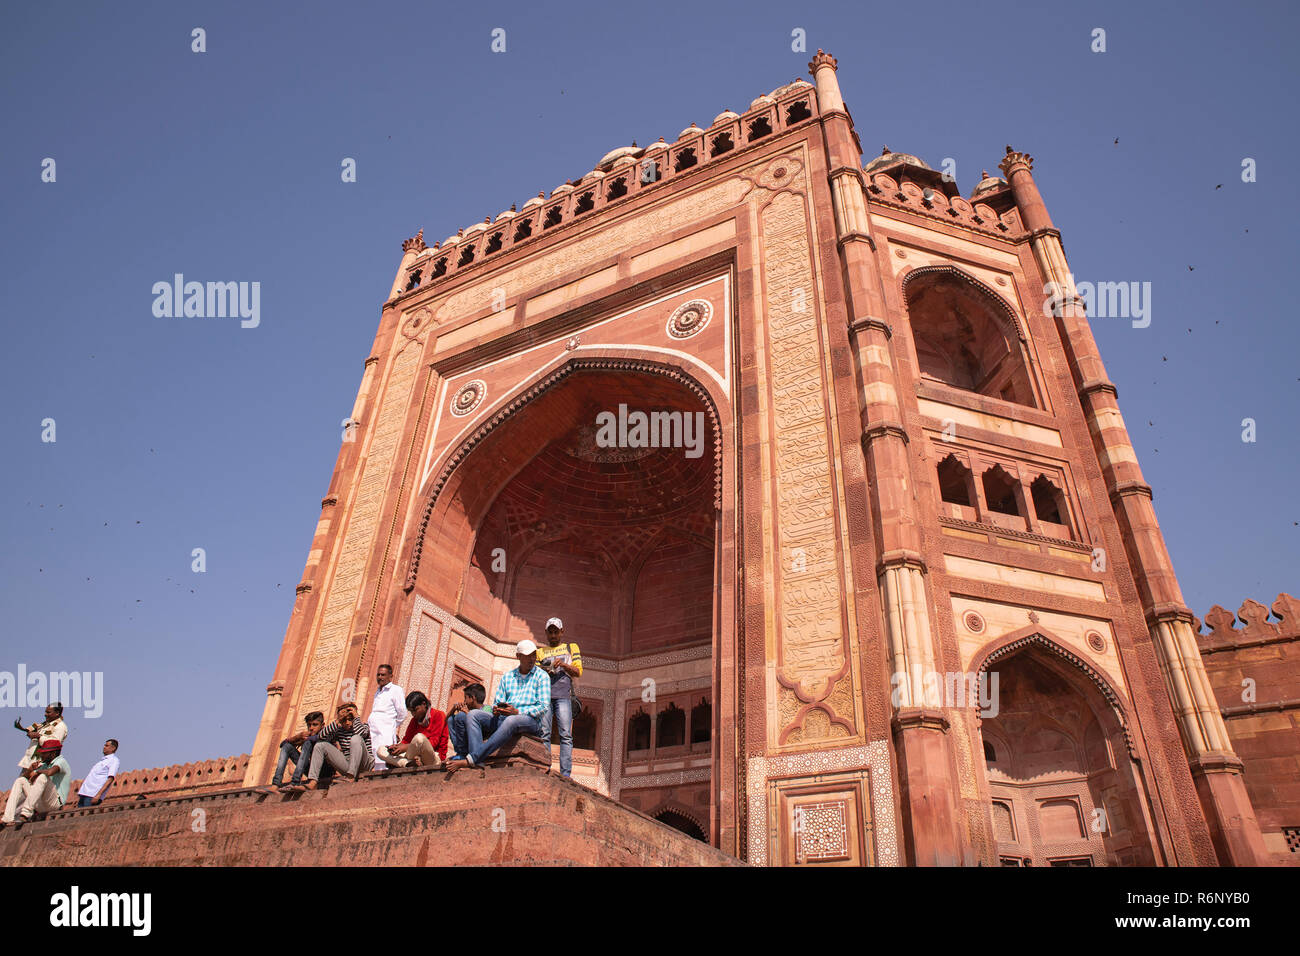 Indian,tourists,resting,on,stairs,East gate,Buland Darwaja,Fateh pur sikri,Agra, U.P.,India. Stock Photo